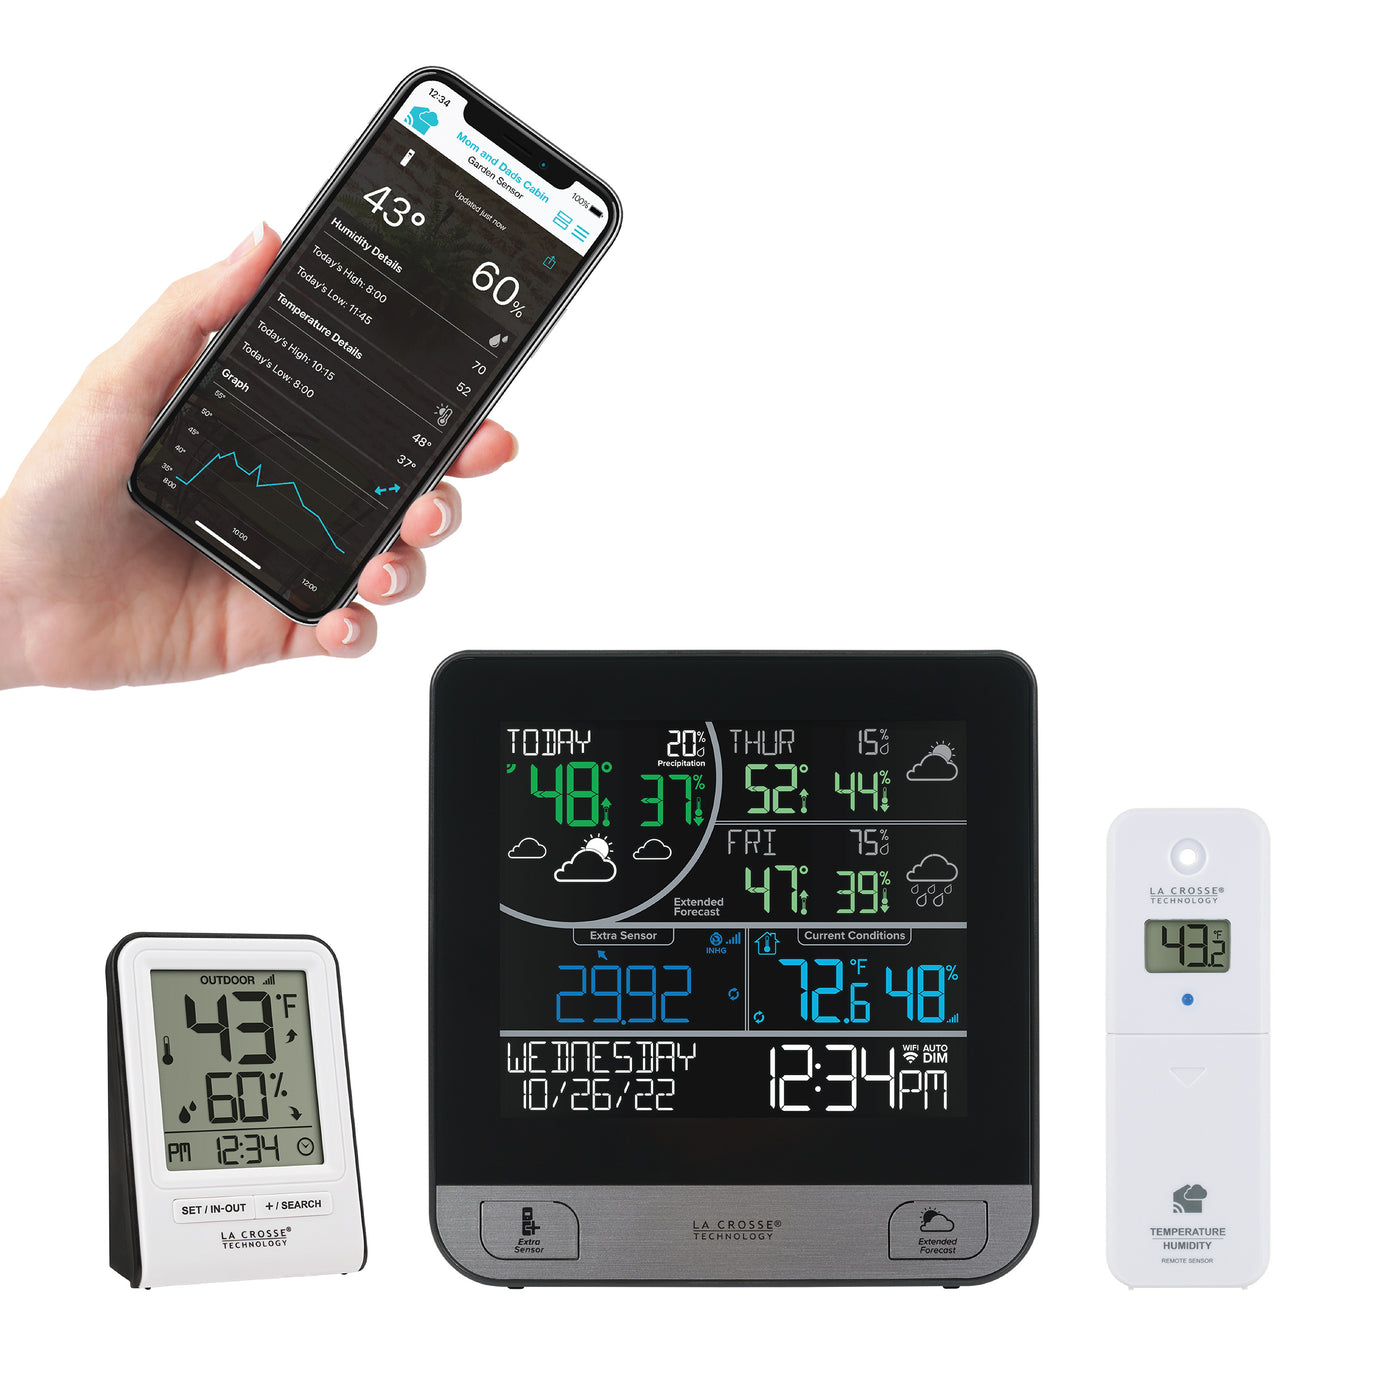 1684344 C74443 Weather Station Bundle with display, outdoor temperature and humidity sensor, bonus station, and phone showing the La Crosse View app.